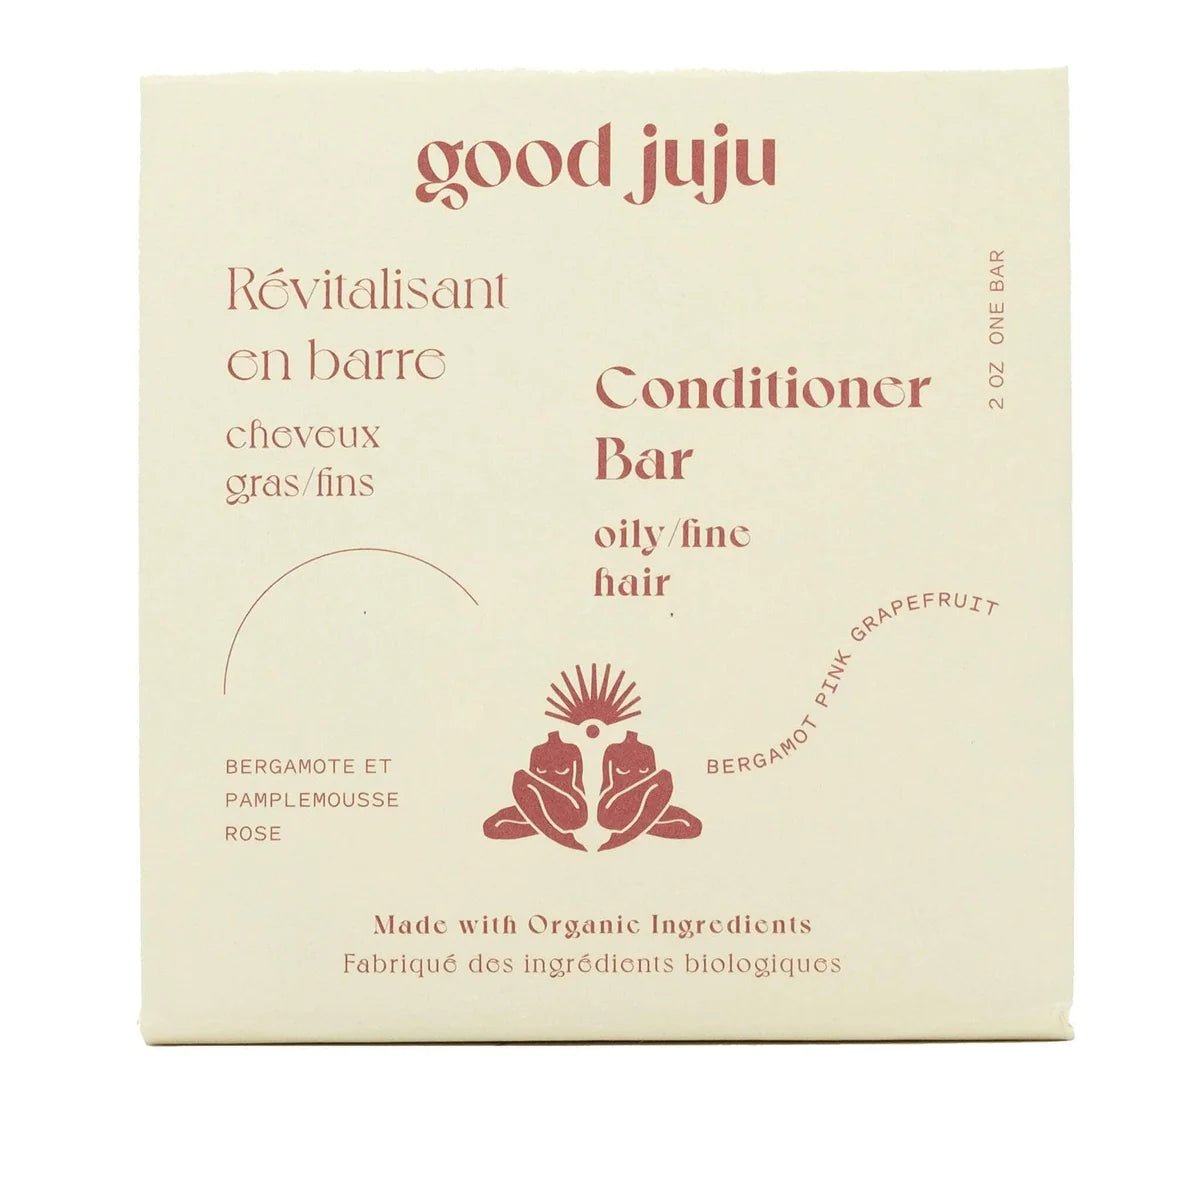 Good Juju Conditioner Bar for Oily/Fine Hair - Blend Box